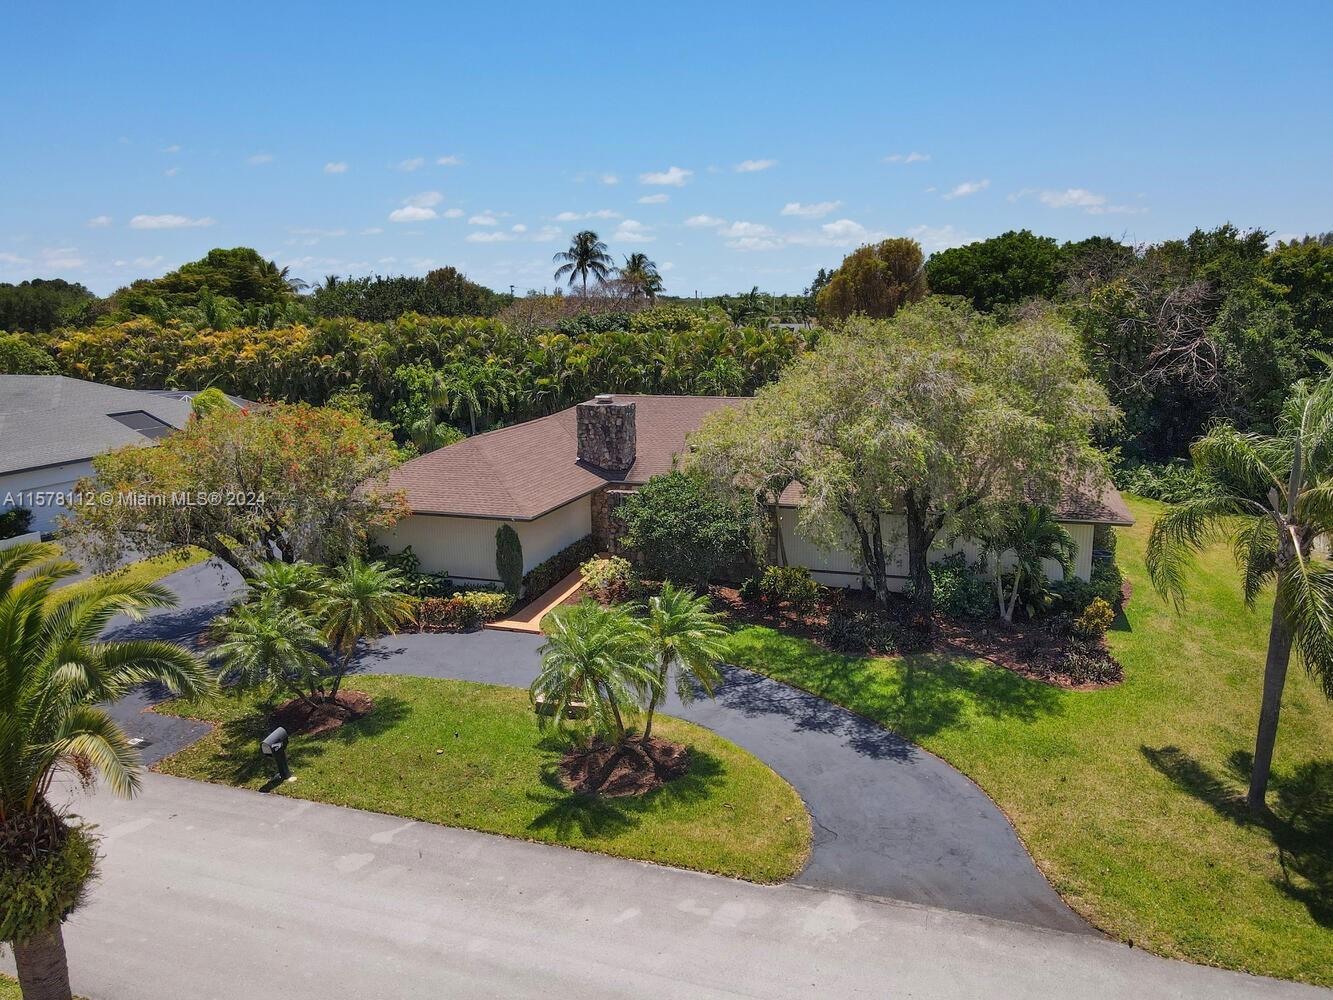 Seize the opportunity to own this beautiful & spacious 4BR/2.5BA home in Cape Cutler Estates! This q